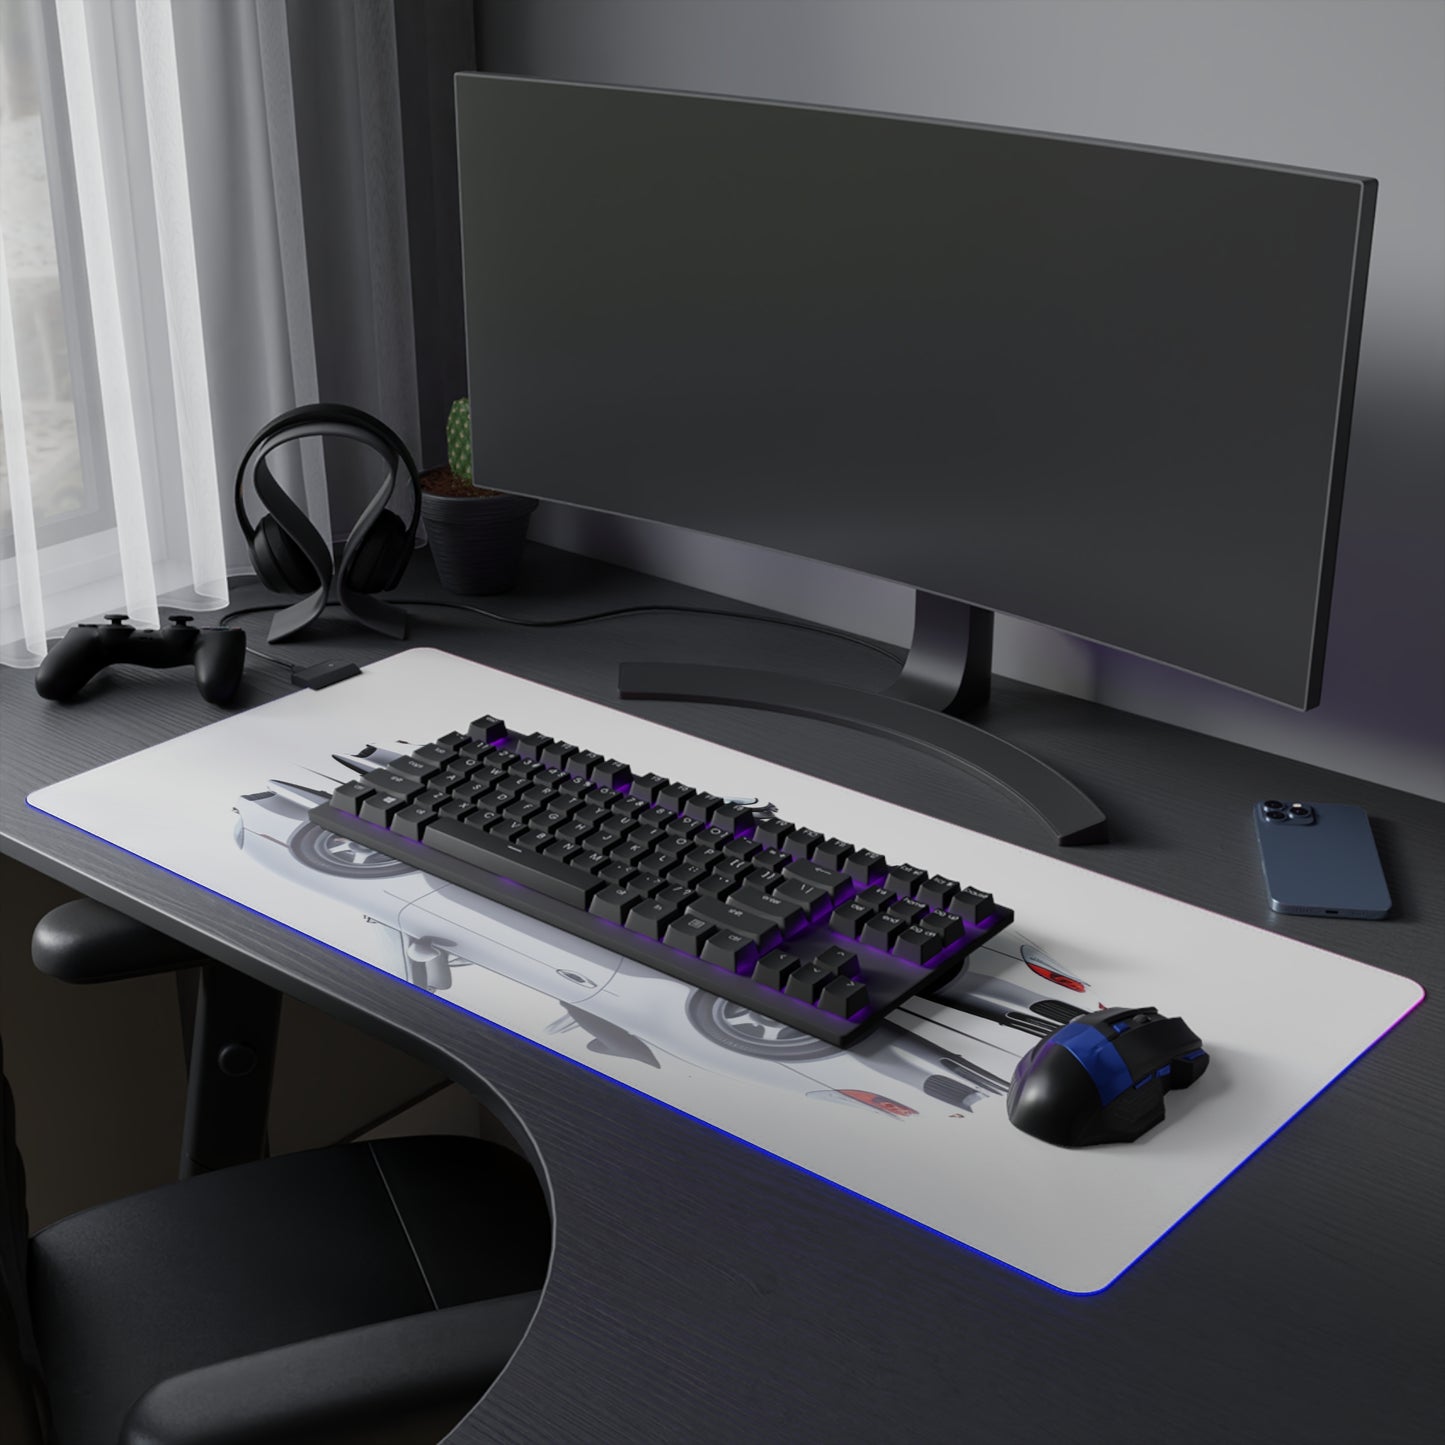 LED Gaming Mouse Pad 911 Speedster on water 3